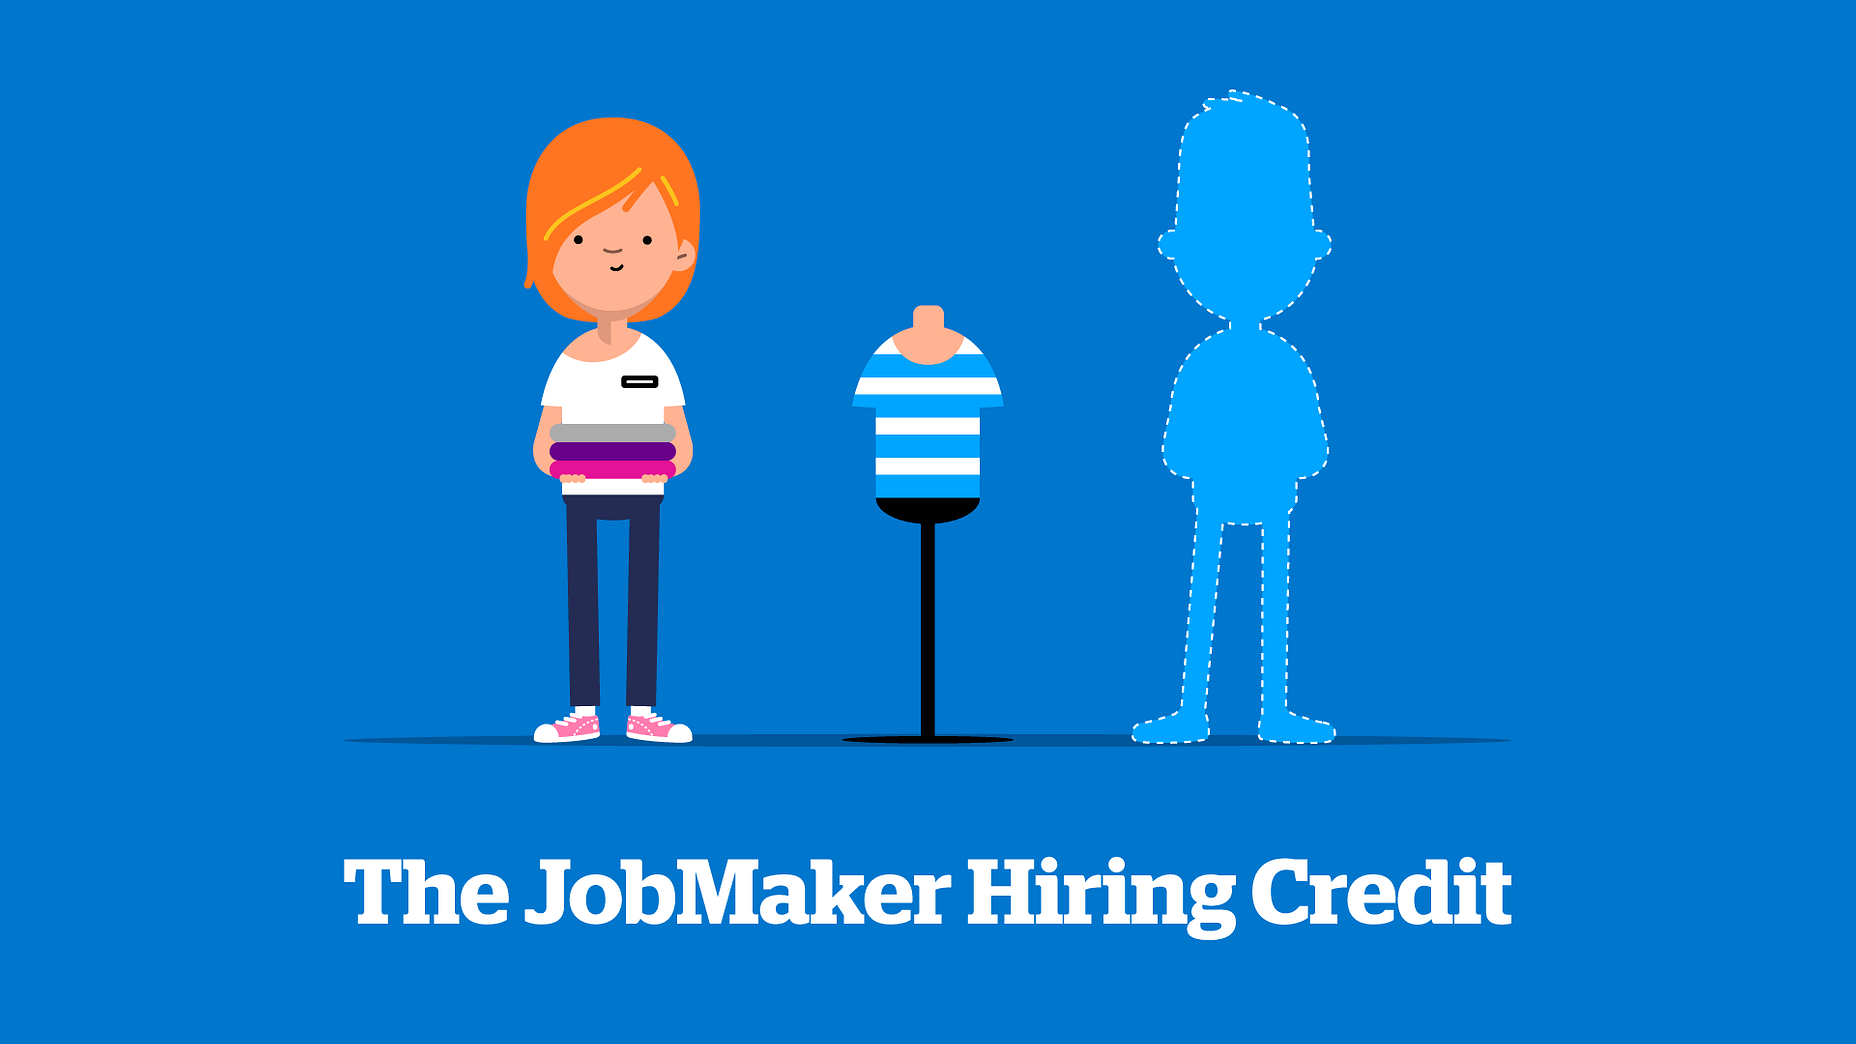 The JobMaker Hiring Credit scheme’s second claim period ends on 31 July 2021